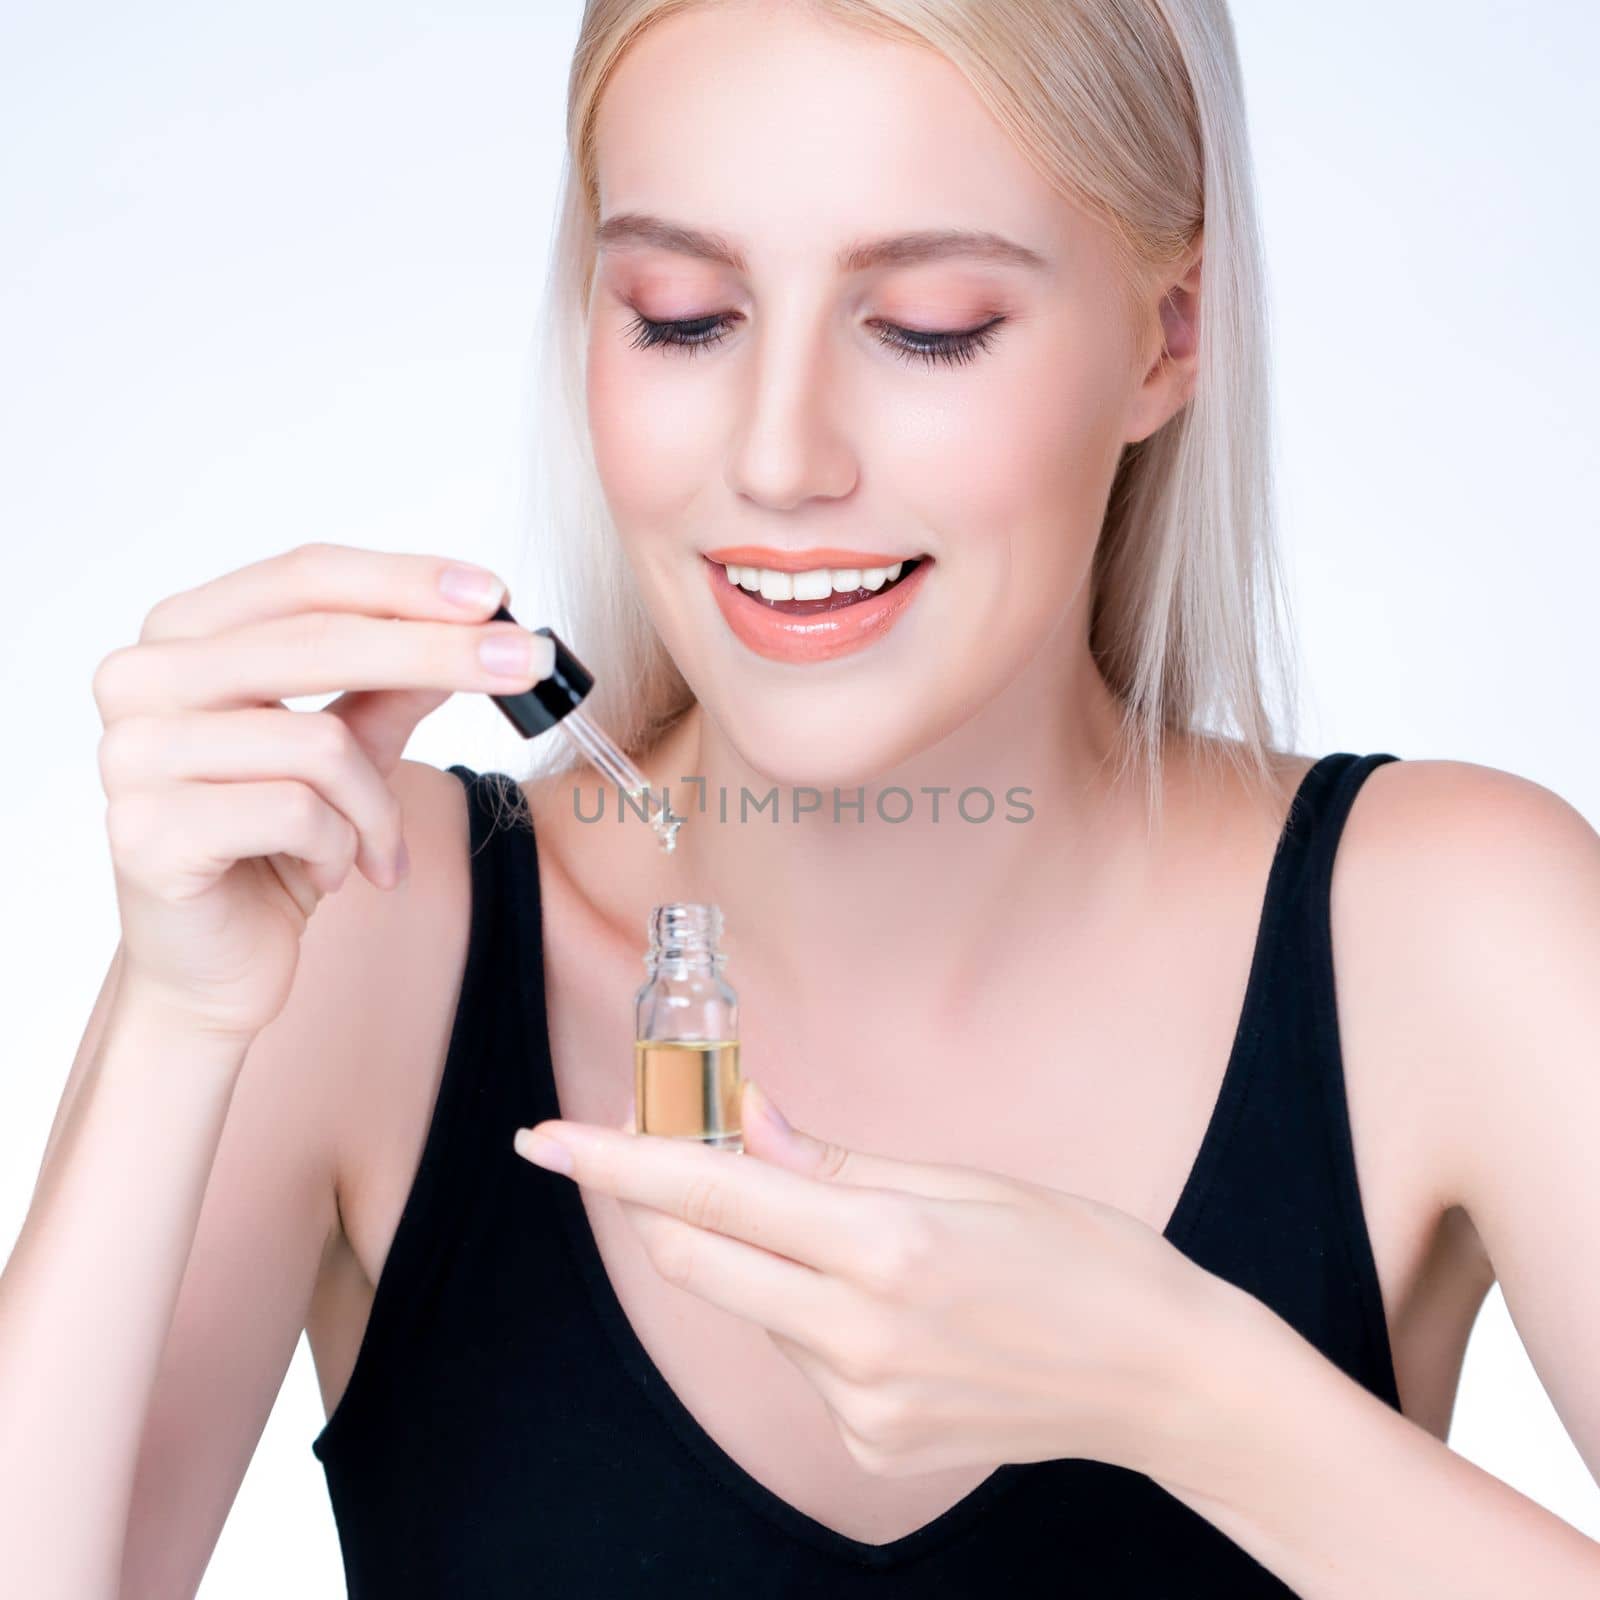 Personable closeup woman applying CBD oil skincare treatment. by biancoblue